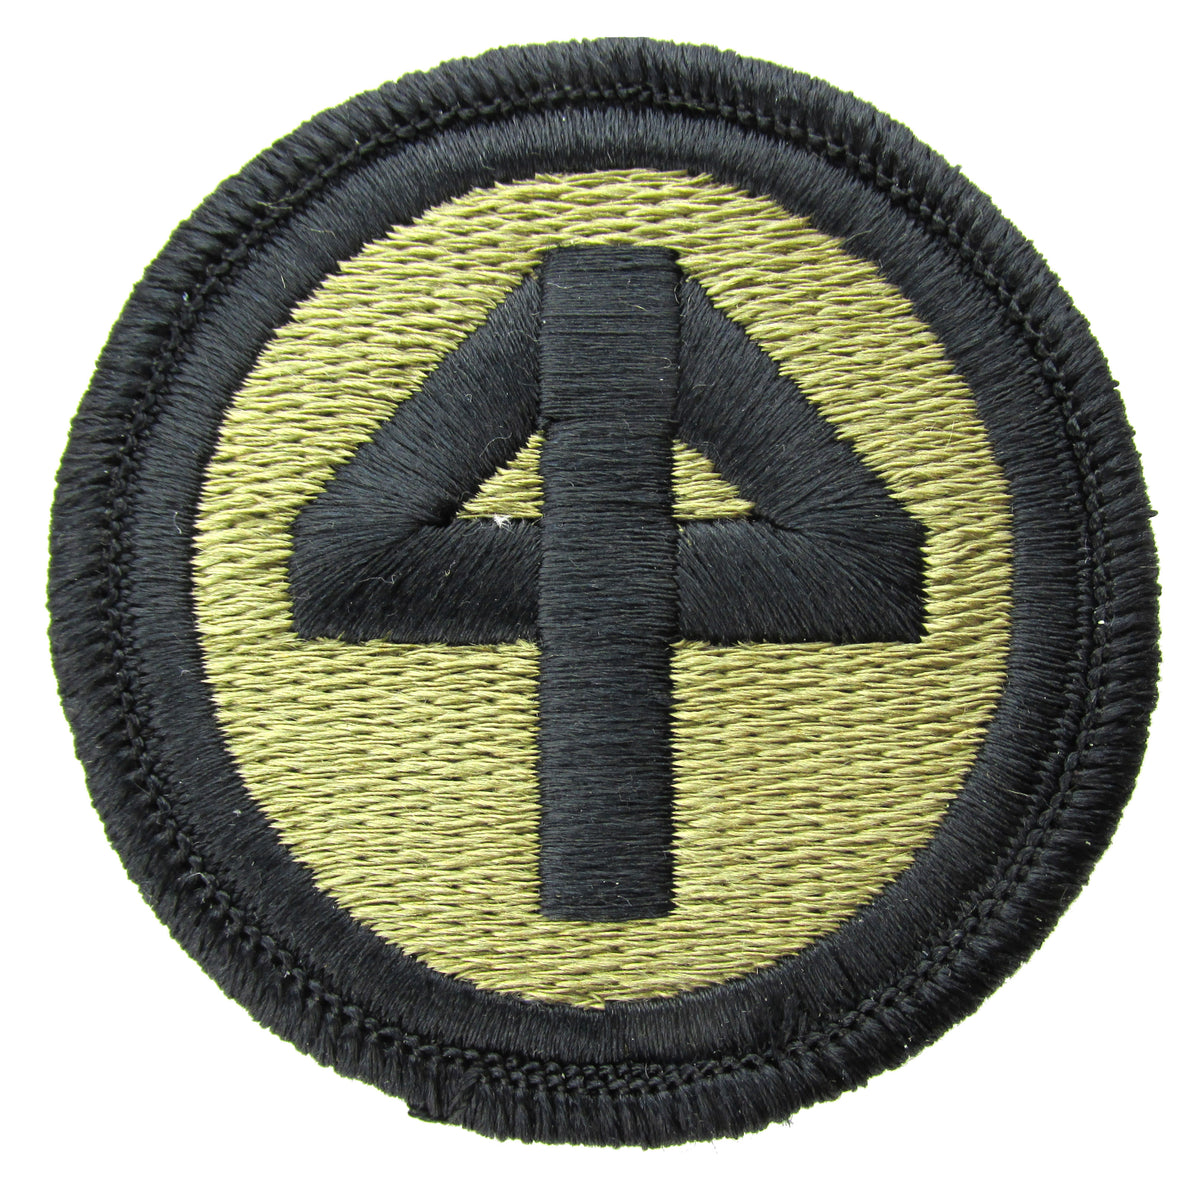 44th Infantry Division OCP Patch - Army Scorpion W2